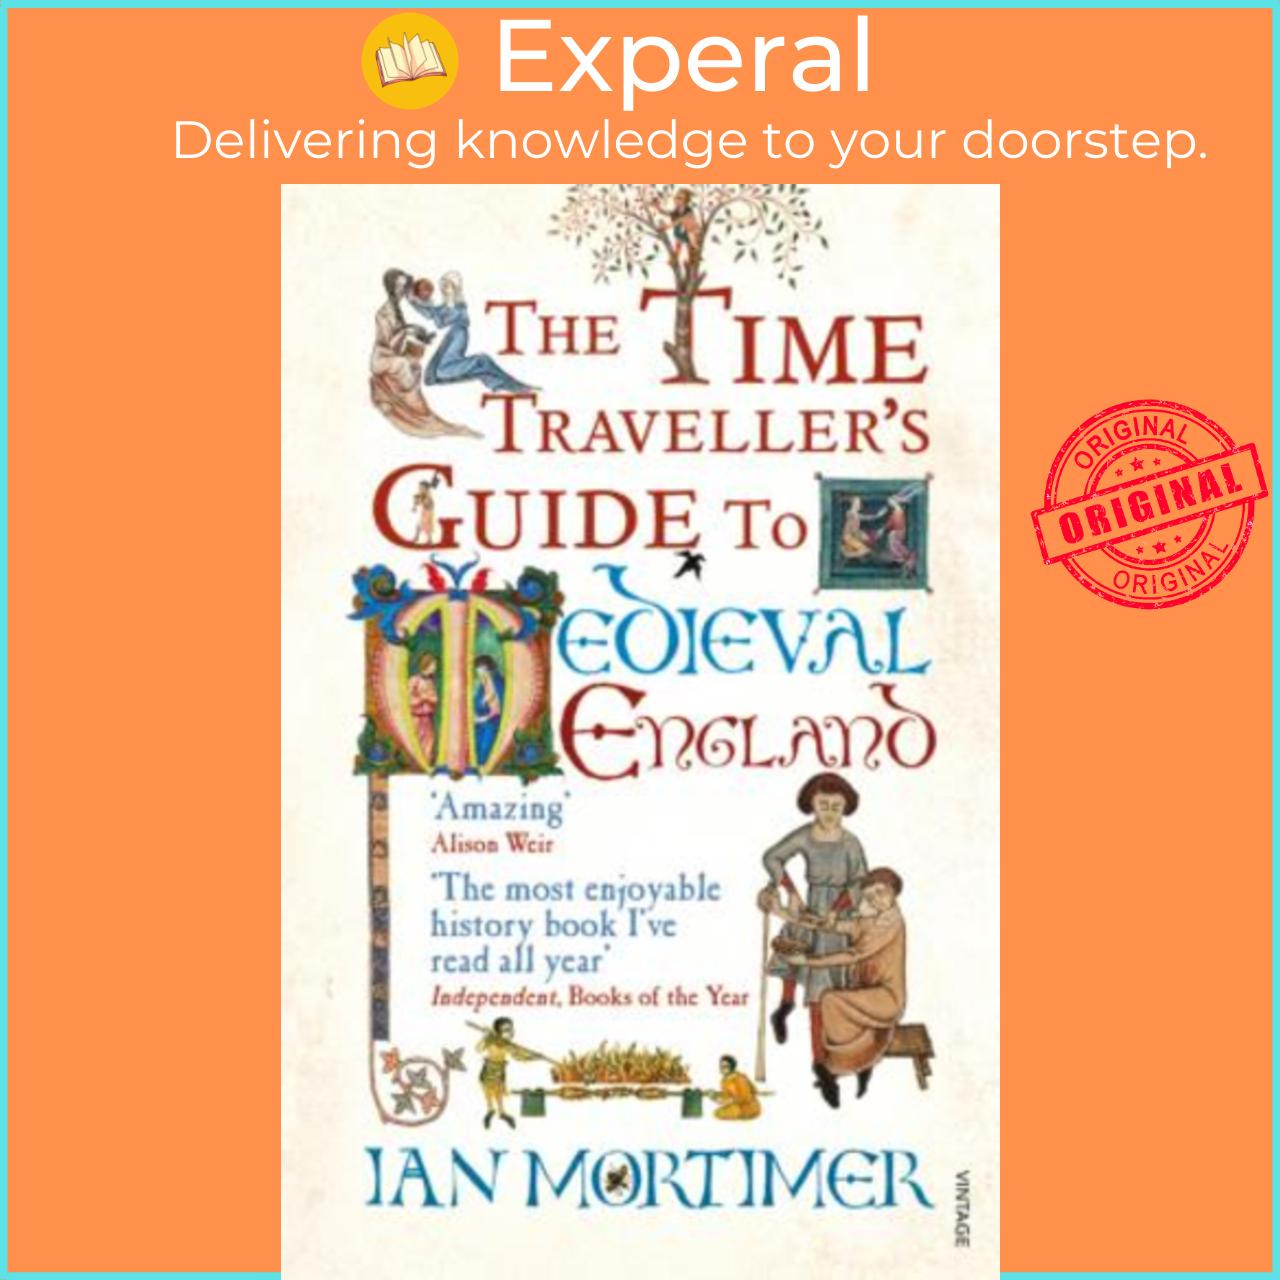 Sách - The Time Traveller's Guide to Medieval England : A Handbook for Visitors  by Ian Mortimer (UK edition, paperback)